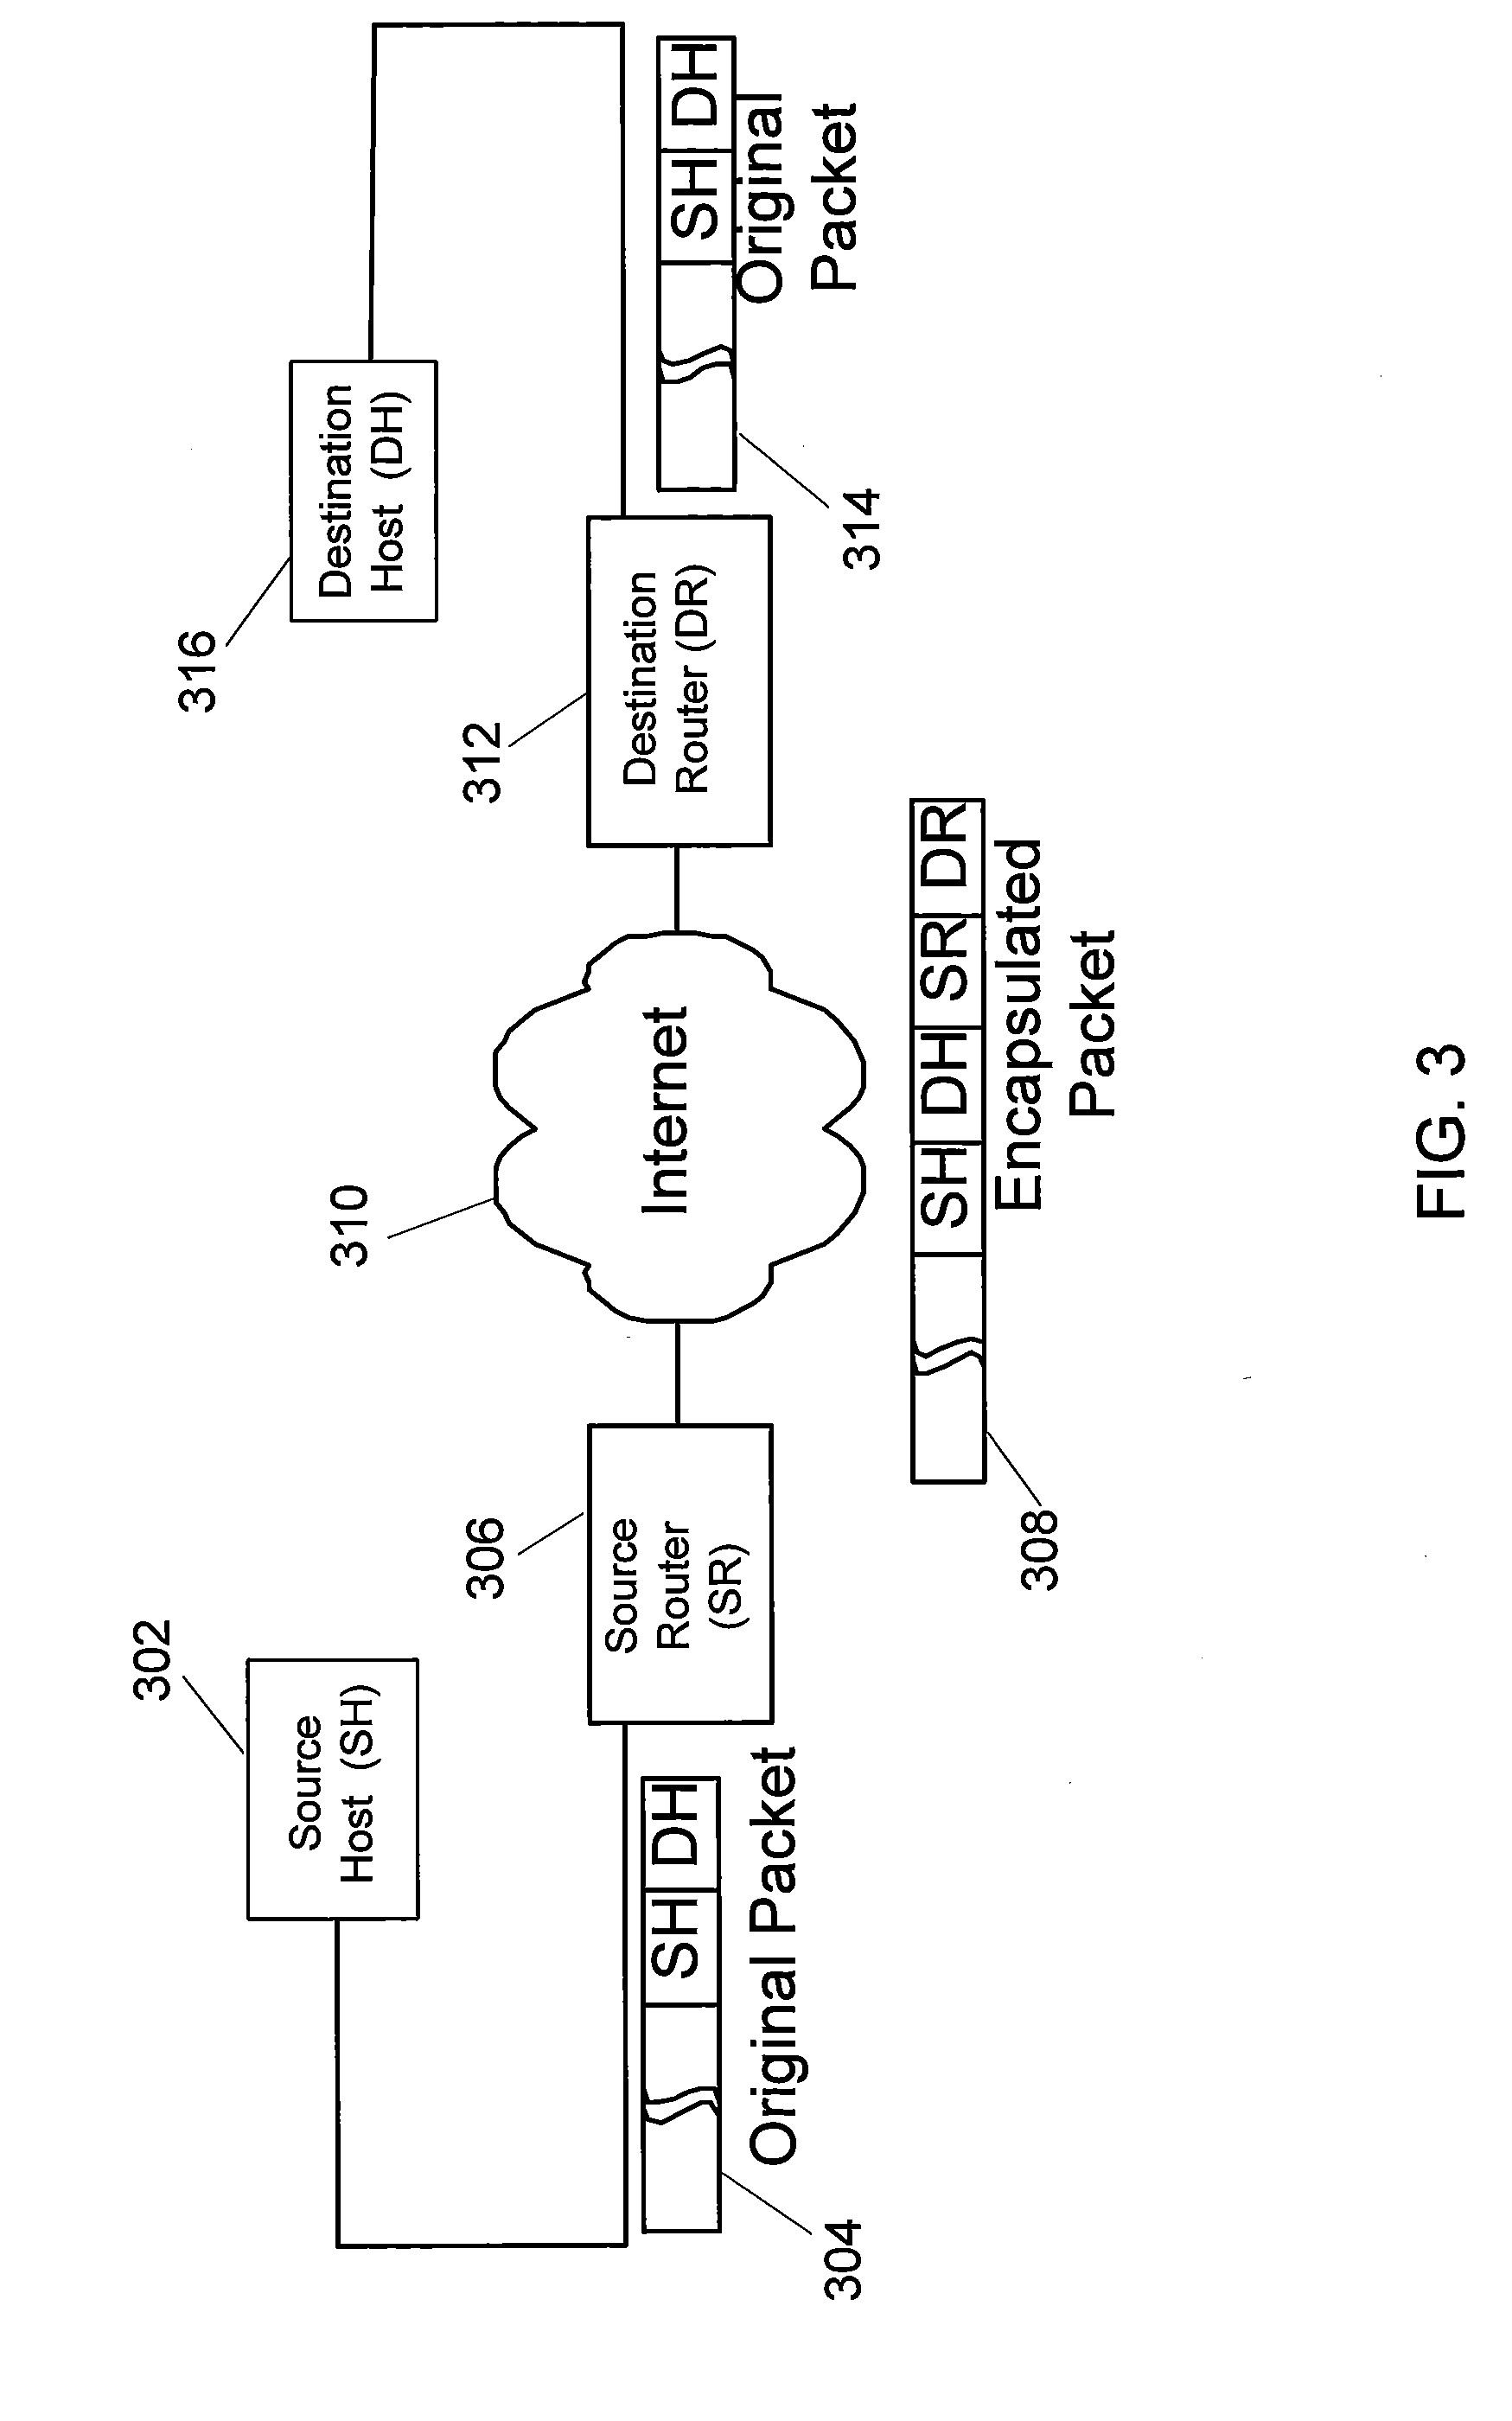 Communications network with converged services